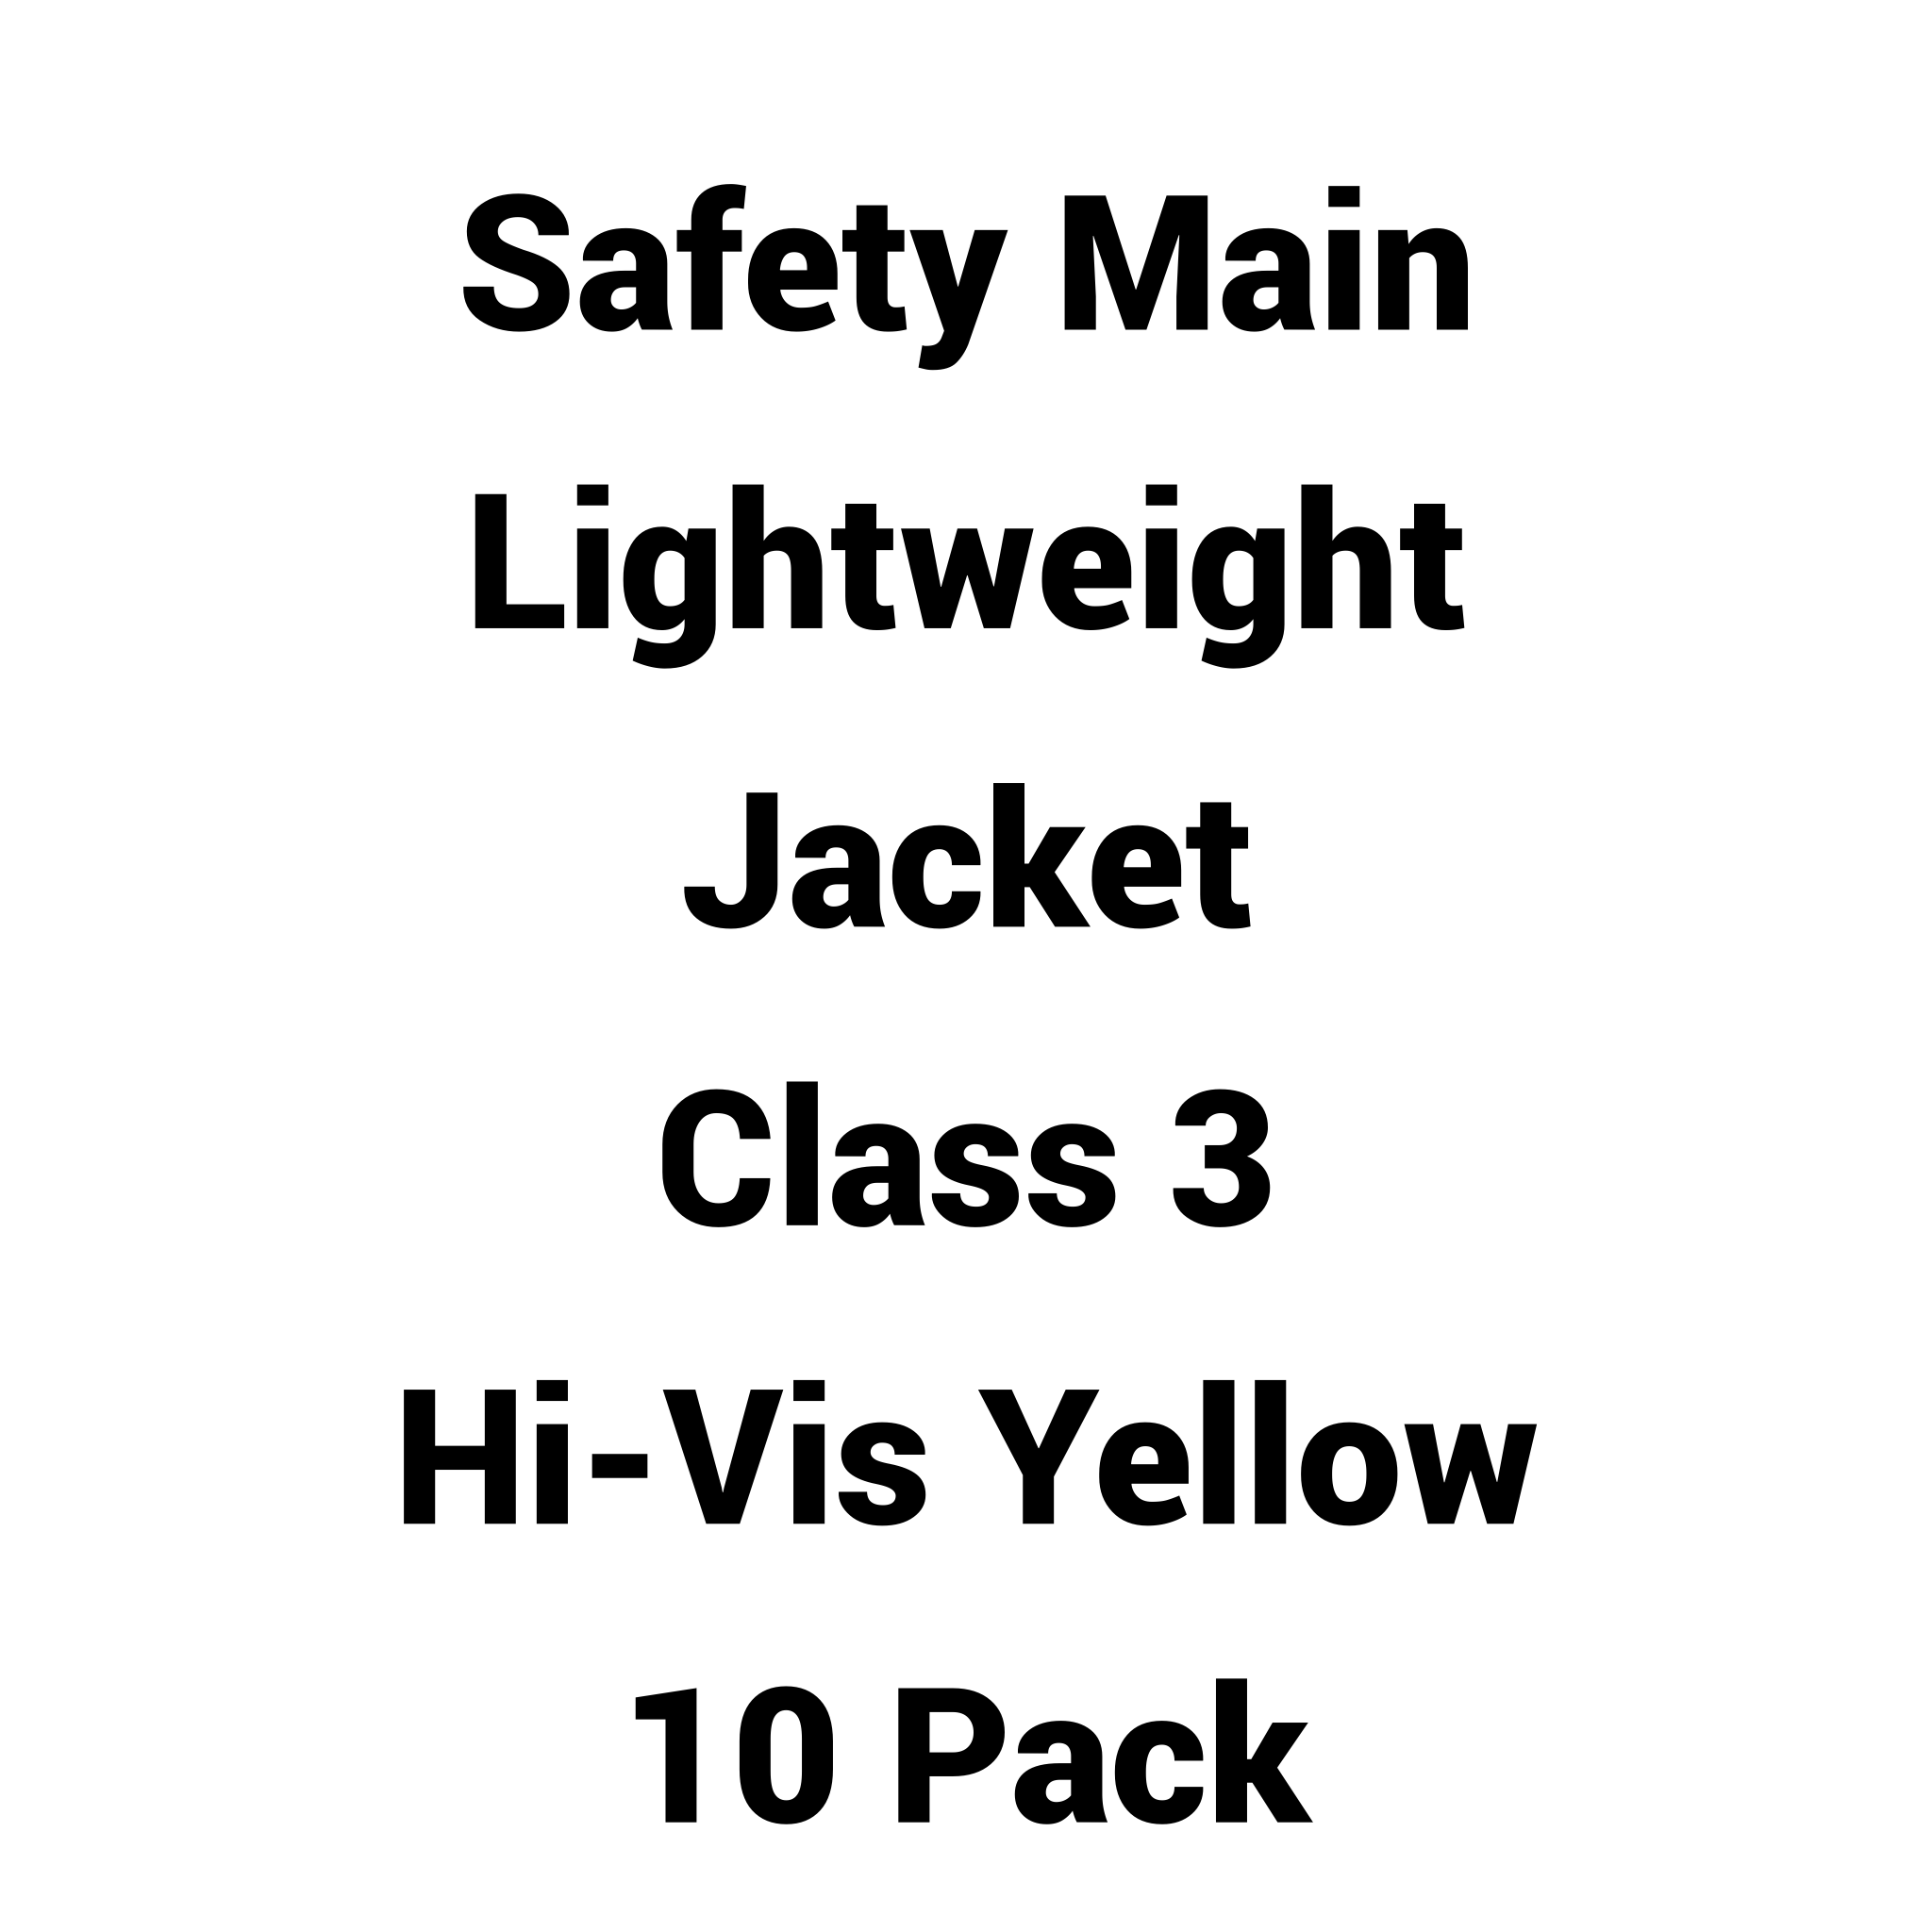 Safety Main 05LWJYB Lightweight Jacket, Class 3, Hi-Vis Yellow with Black Bottom, Pack of 10